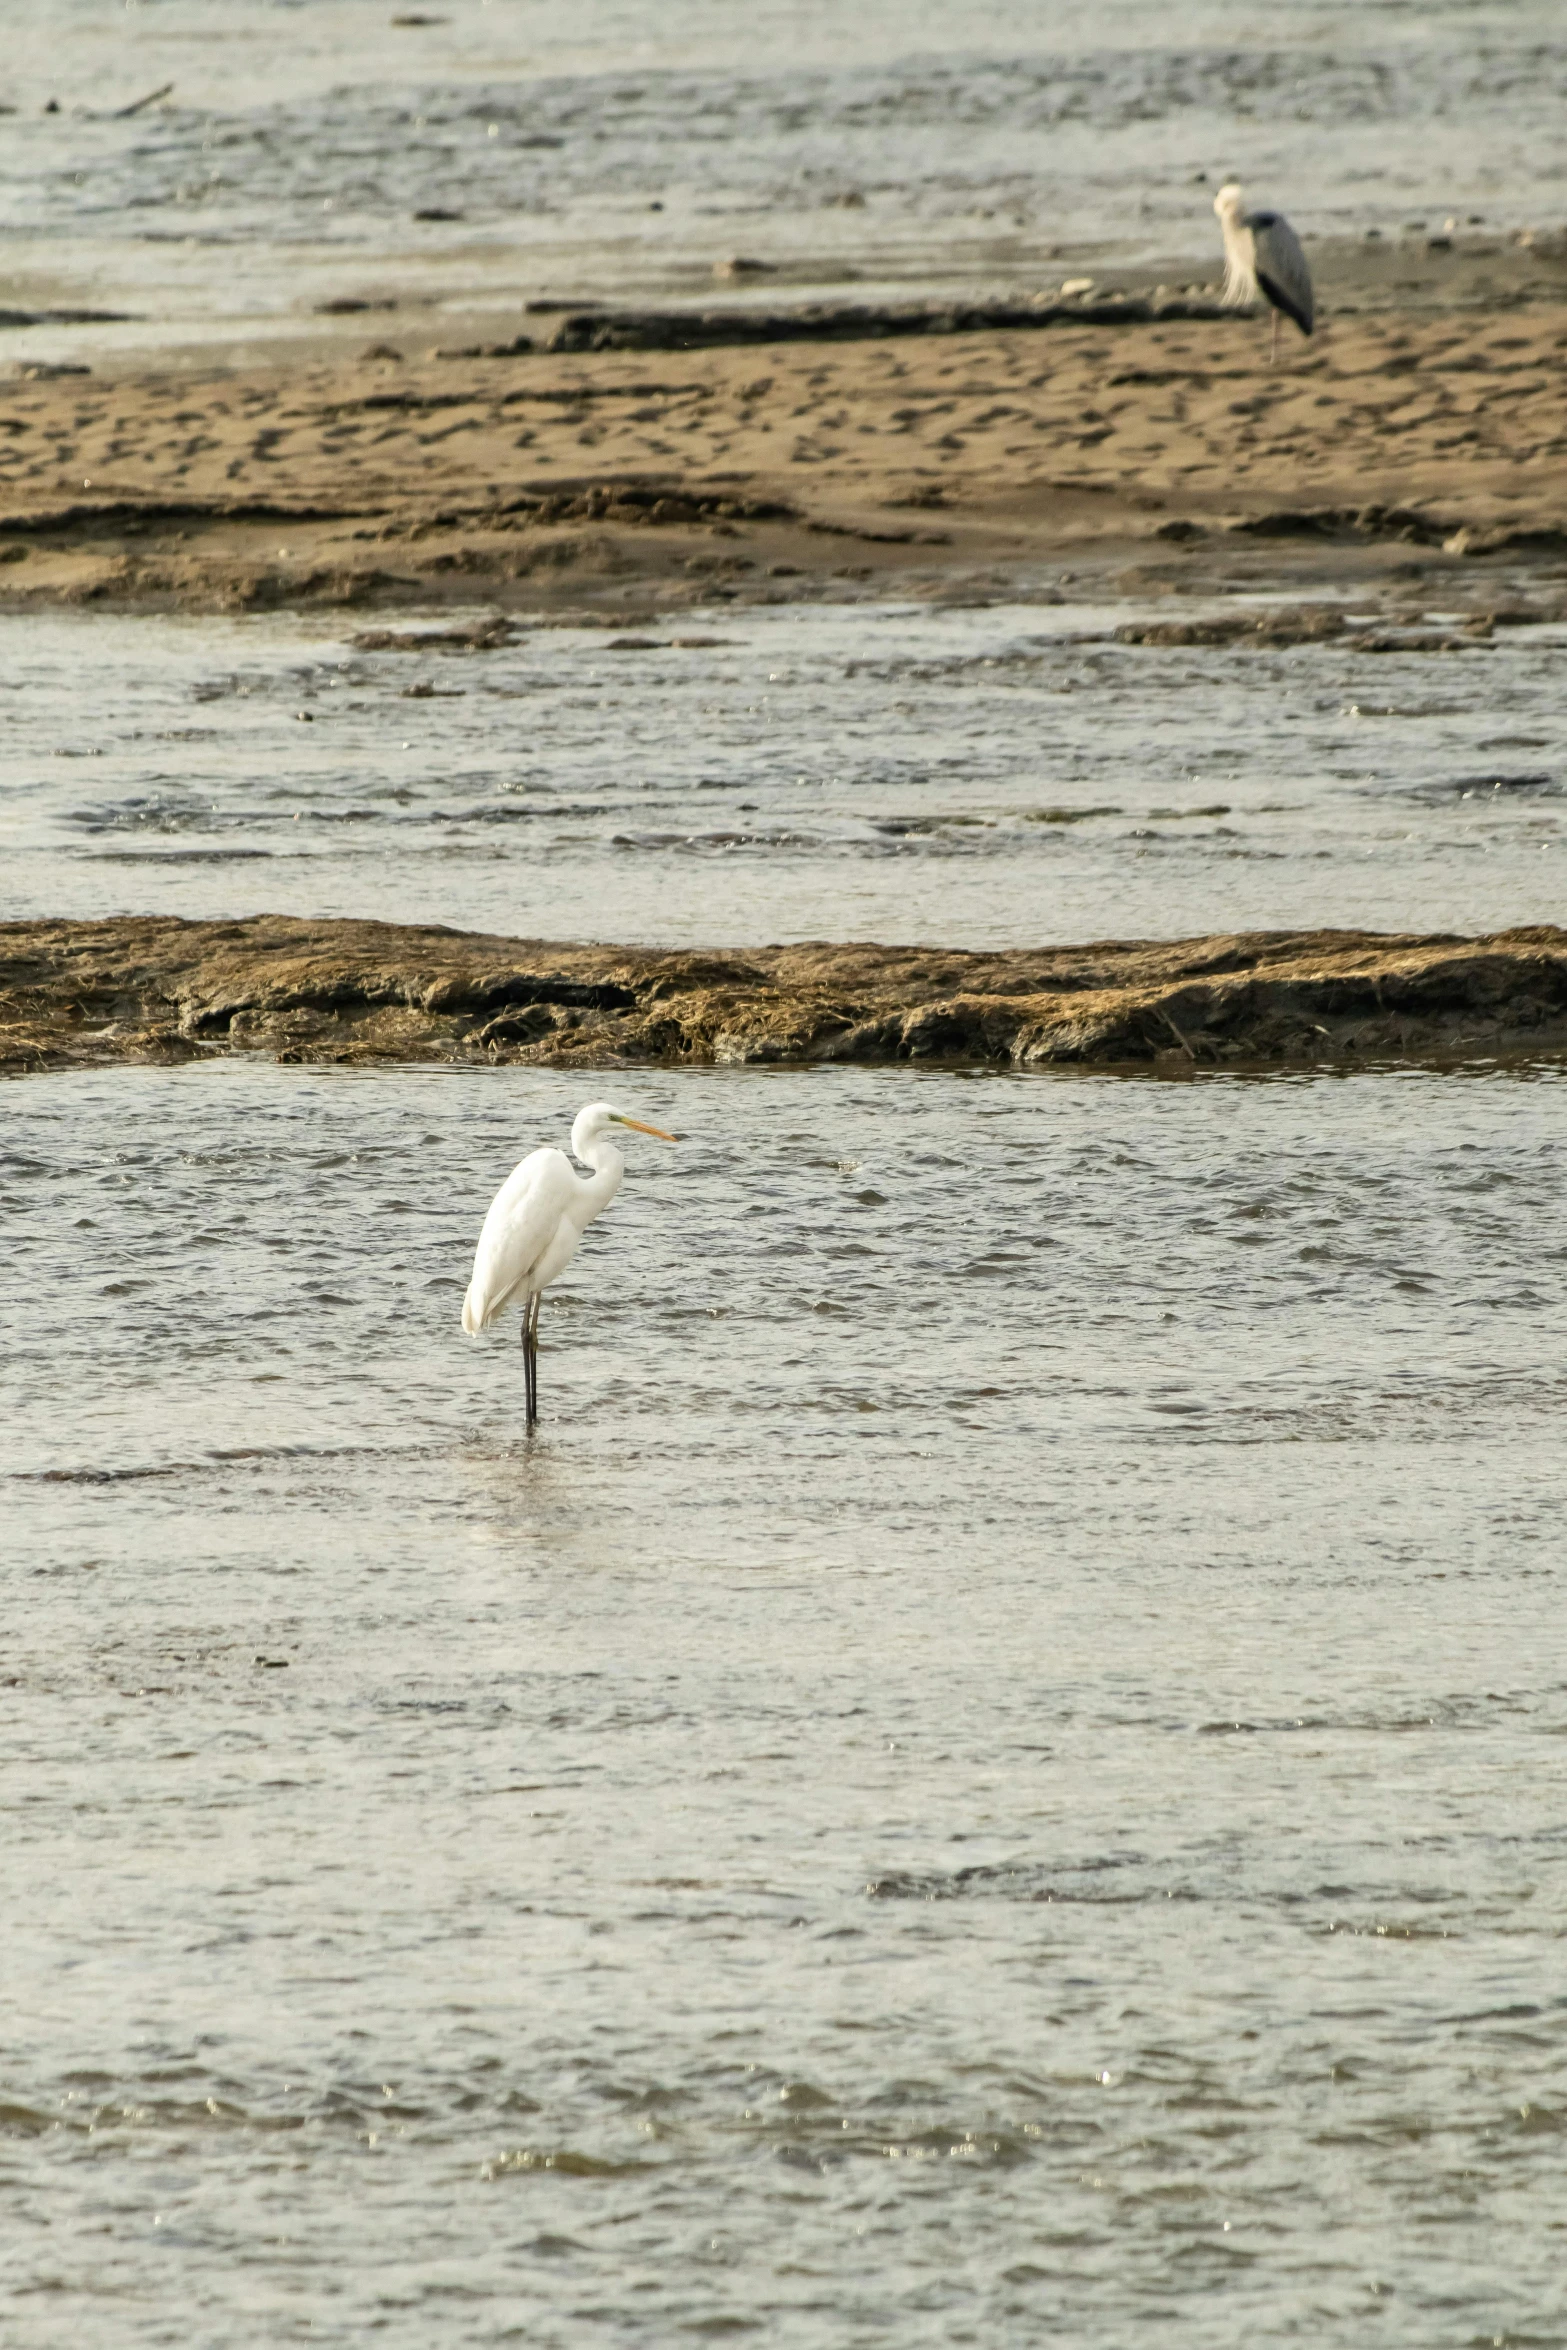 a white crane stands in shallow water, among the others